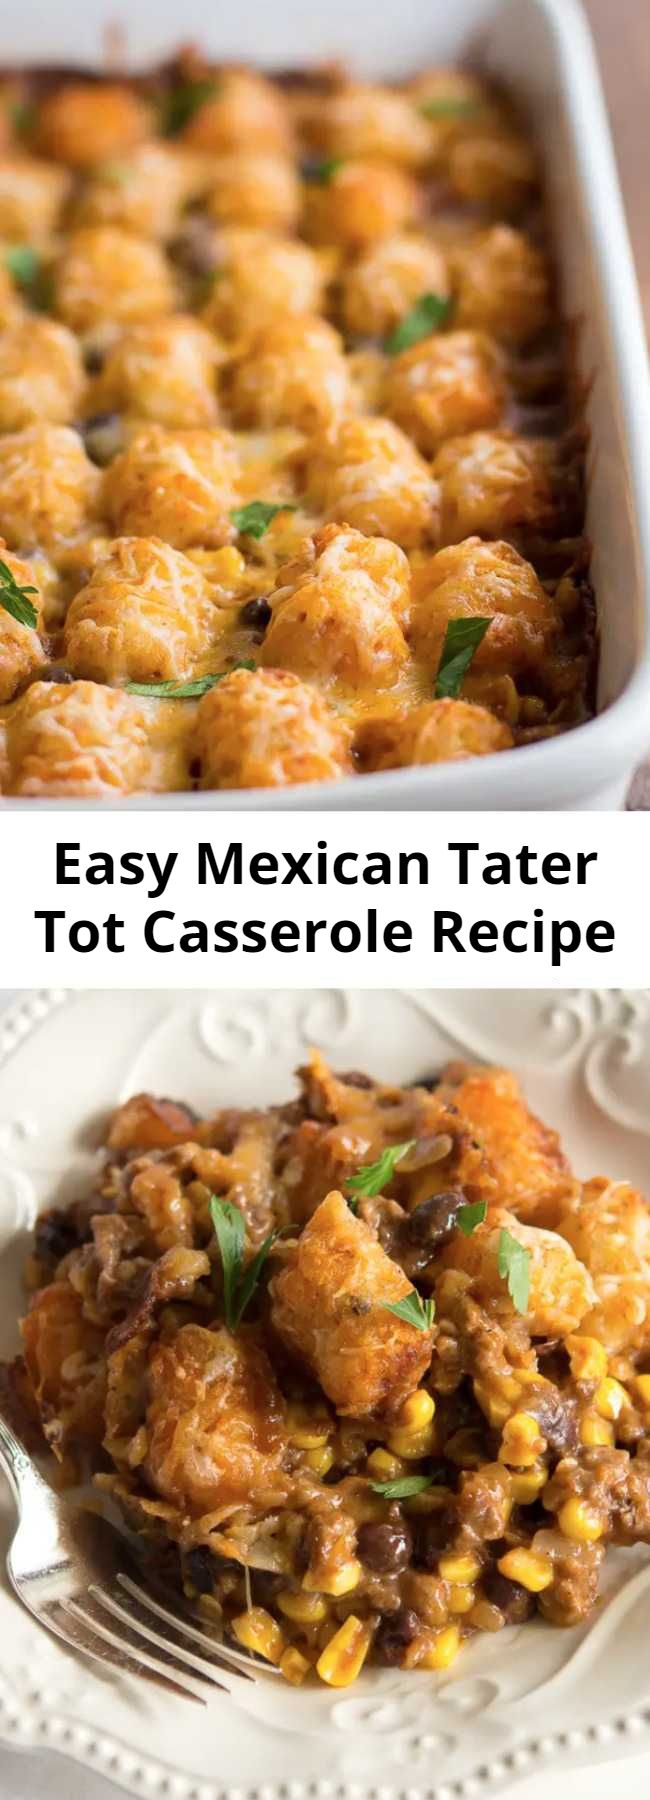 Easy Mexican Tater Tot Casserole Recipe - This easy tater tot casserole will please everyone in your crew---even picky kids! This delicious taco-inspired tater tot casserole recipe is chock-full of black beans, corn, ground beef and a whole lot of flavor.